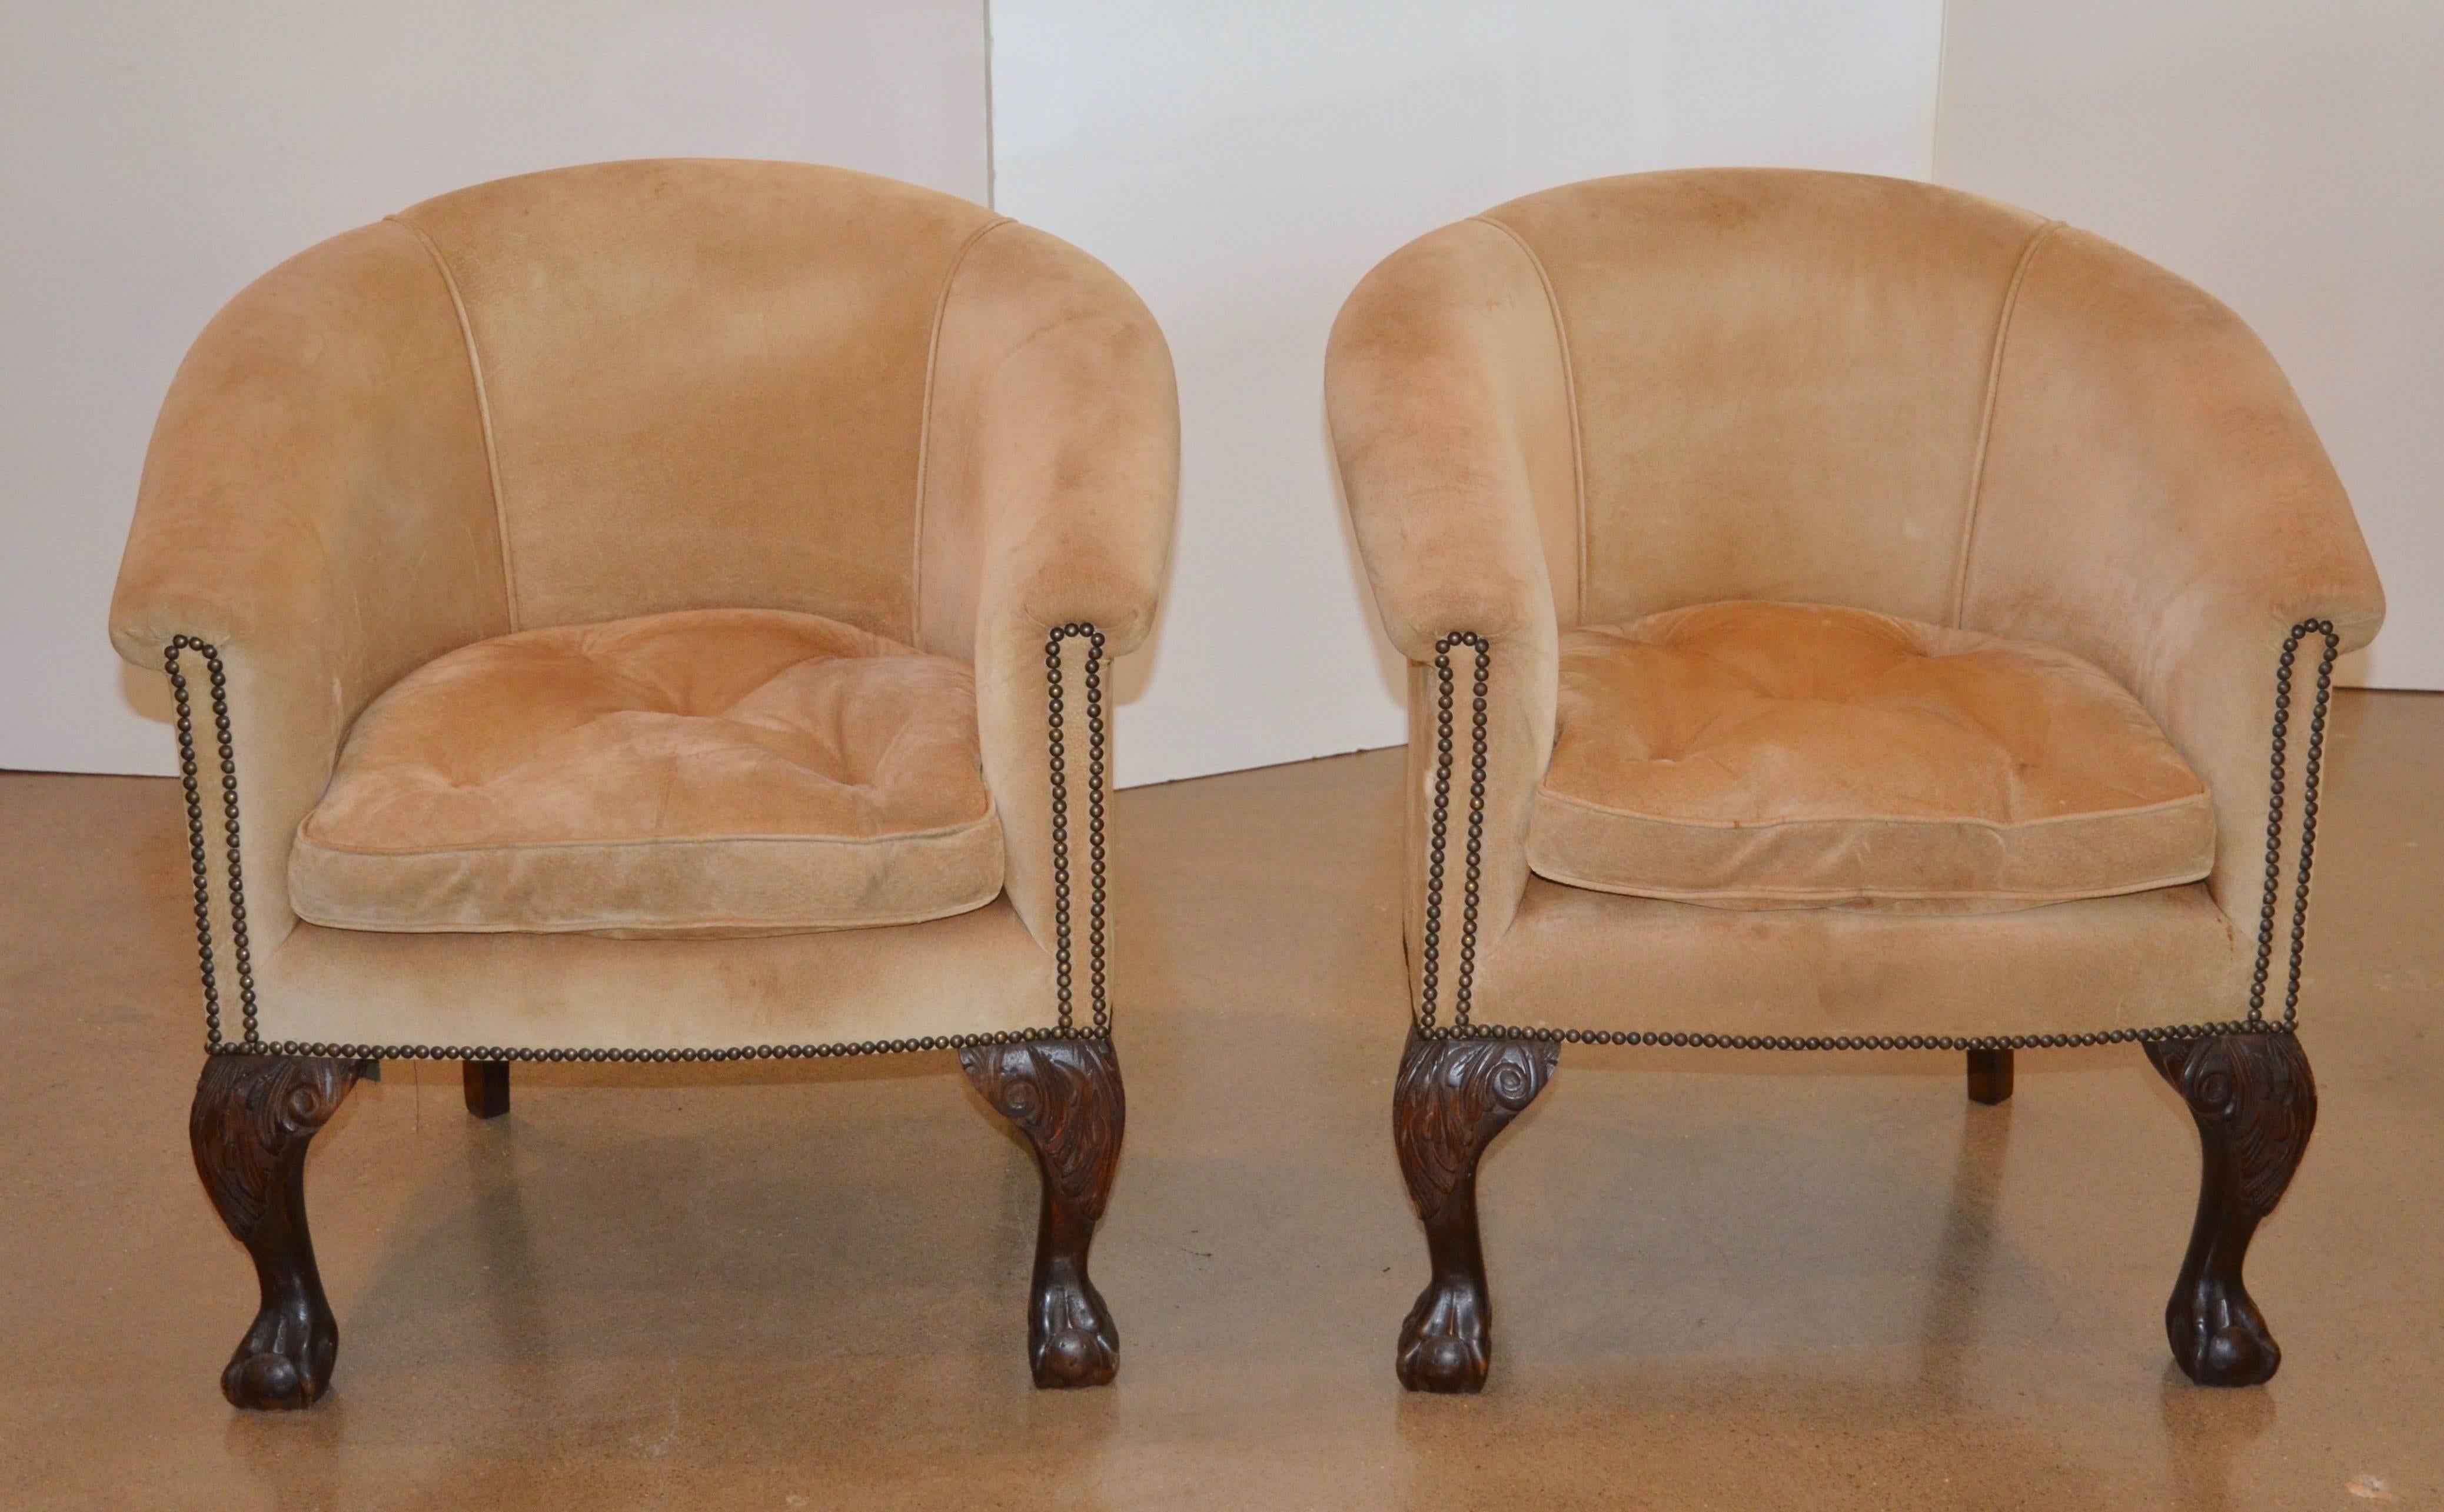 Vintage Barrel Back Chairs in Suede with Ball and Claw 1